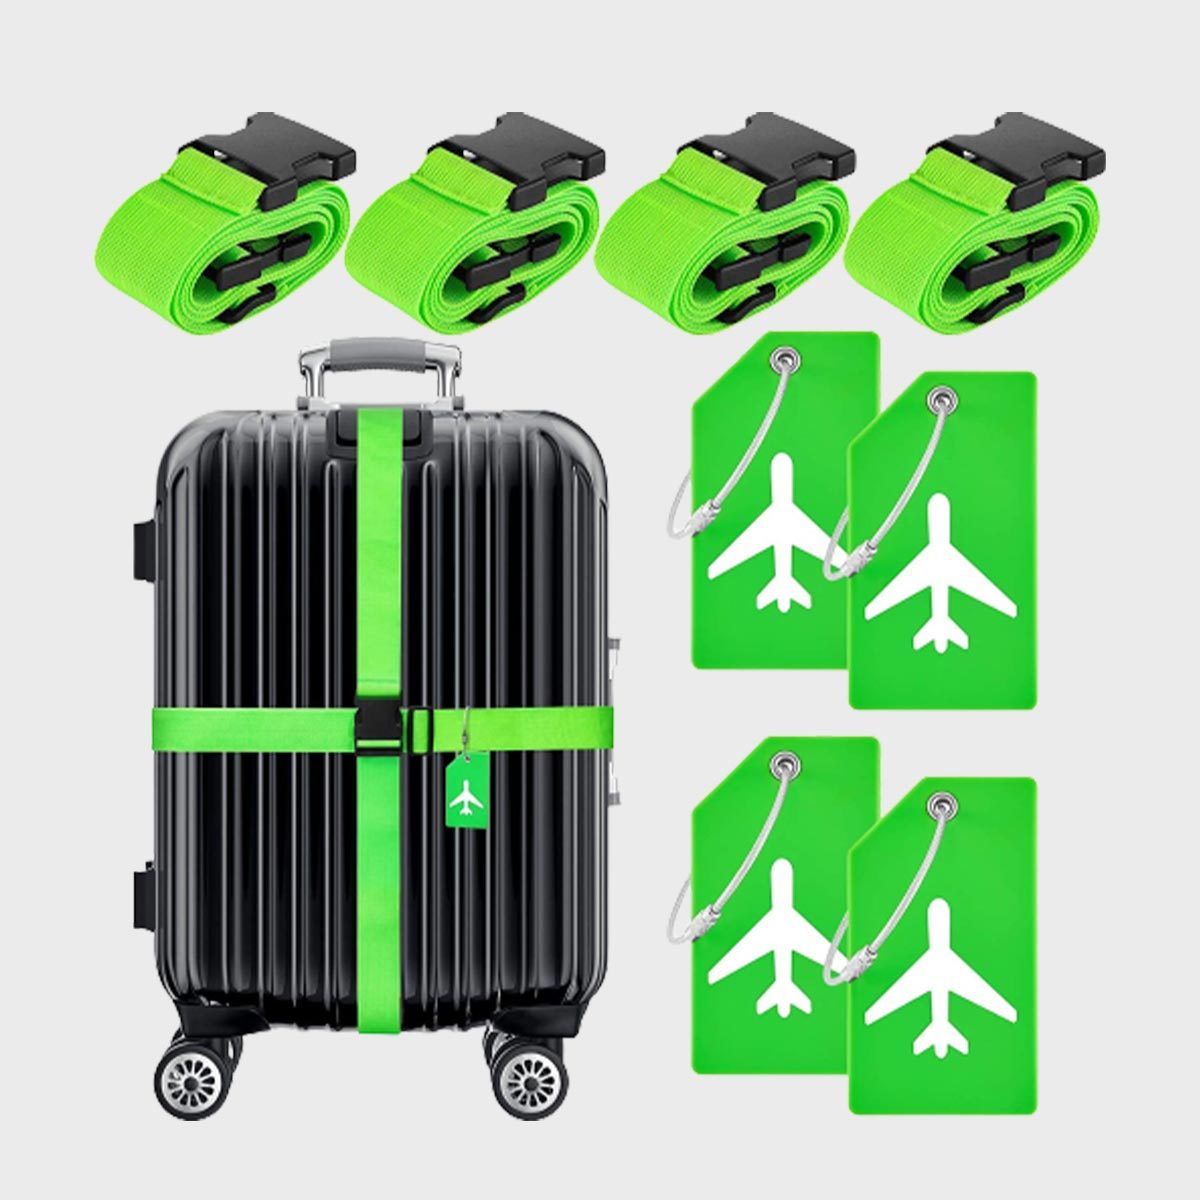 <p><a href="https://www.rd.com/list/frequent-travelers-airplane-hacks/">Experienced travelers</a> agree that you can never be too careful when it comes to luggage security. This <a href="https://www.amazon.com/Luggage-Adjustable-Suitcase-Silicone-Accessories/dp/B08XQGMQH9" rel="noopener">Weewooday accessories set</a> secures includes four luggage tags and four brightly hued belts that securely wrap around your bag. This prevents suitcases from opening, deters theft and also easily allows you to identify it among a sea of black bags on the luggage carousel.</p> <p class="listicle-page__cta-button-shop"><a class="shop-btn" href="https://www.amazon.com/Luggage-Adjustable-Suitcase-Silicone-Accessories/dp/B08XQGMQH9">Shop Now</a></p>  <h2>Why you should trust us</h2> <p><span>When it comes to luggage, our editors are not only testers—they're customers. Whether flying the friendly skies, cruising the ocean or hitting the open road, we’ve tested bags, backpacks and suitcases for every type of traveler. We’ve tried many of the top luggage brands, including Monos, </span><a href="https://www.rd.com/article/away-vs-beis/"><span>Beis, Away</span></a><span>, Roam and Briggs and Riley, and ranked the best carry-ons, underseat bags, weekenders, luggage sets and affordable suitcases, and also regularly try out travel accessories like neck pillows, toiletry bags, packing cubes and luggage racks.</span></p> <h2>FAQ</h2> <h3 class="JlqpRe"><span><span>Should luggage tags be on top or side?</span></span></h3> <p>For baggage that's being checked on an airplane or cruise ship, place your luggage tag on the top handle. When suitcases are loaded into luggage carts they're placed on their sides, so keeping your luggage tag on the top will keep it visible.</p> <div> <h3 class="JlqpRe"><span><span>What is the best material for a luggage tag?</span></span></h3> <p>When it comes to the best material for luggage tags, it's all about durability. Look for something that can stand up to the elements and won't get damaged. Silicone and PVC are good choices if you're going somewhere wet and rainy, or on a cruise. Metal tags are a great option for checked luggage that might be handled roughly. If aesthetics are important, thick leather tags are not only durable but stylish as well.</p> <div class="aj35ze"><strong>Source:</strong></div> </div> <ul> <li> <p>Iyanifa Shondra Cheris, owner and lead explorer, <a href="http://blackwilltravel.com/" rel="noopener">BlackWillTravel.com</a></p> </li> </ul>